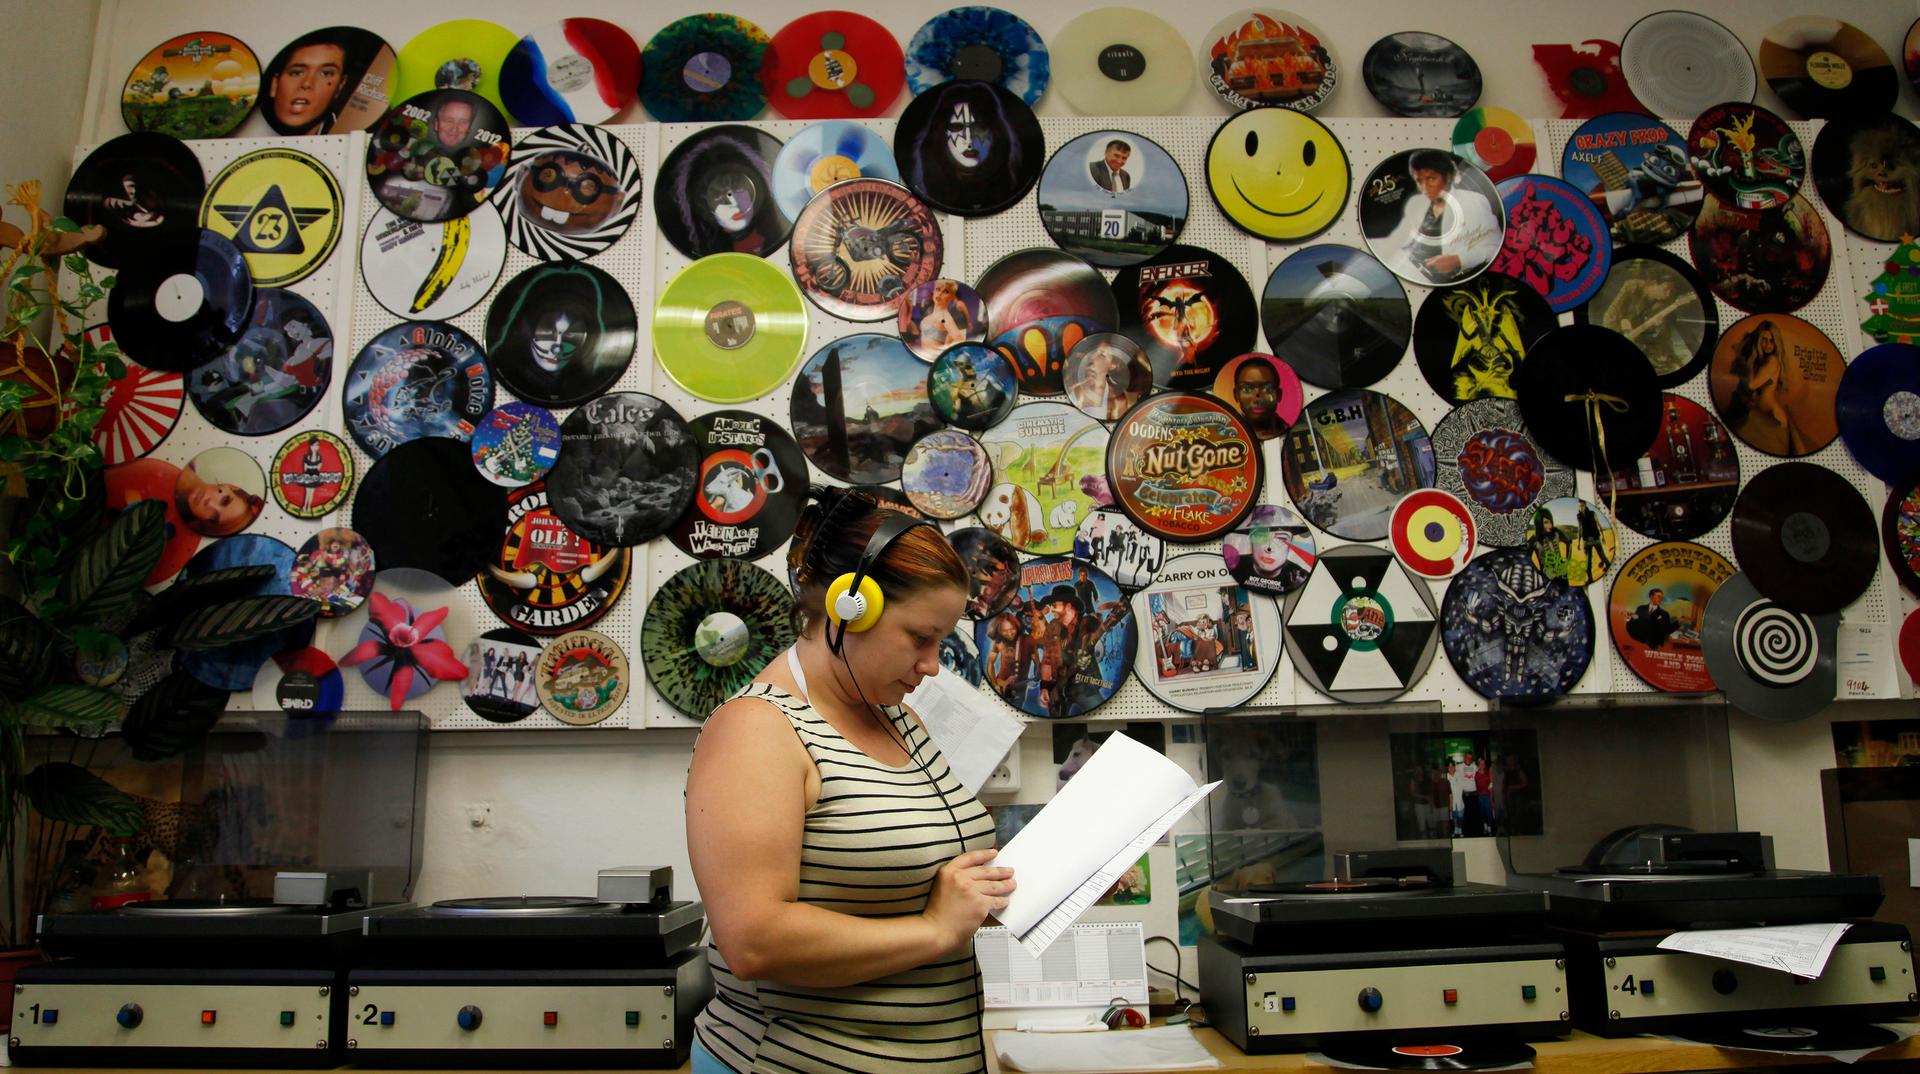 Employee Petra Kottova checks the sound quality of a pressed vinyl record at the GZ Media factory in Lodenice August 1, 2013